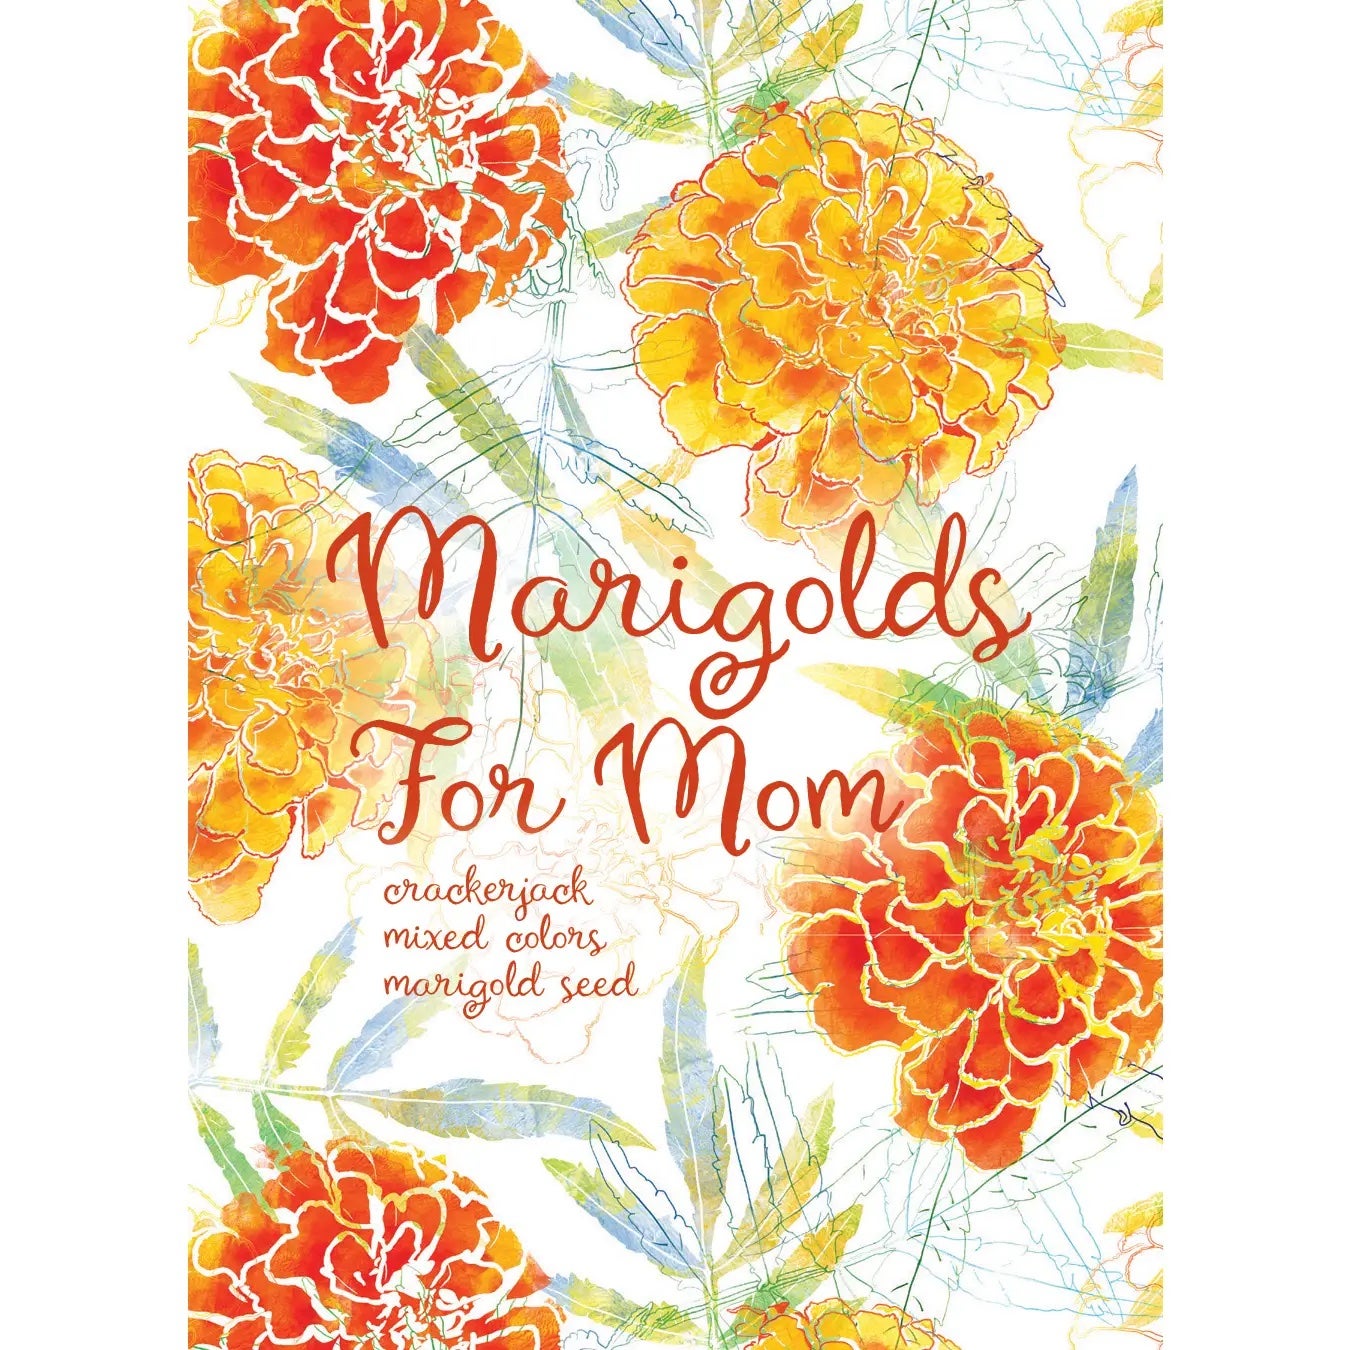 Hippie Gifts For A Hippie Mom On Mother's Day - Saffron Marigold